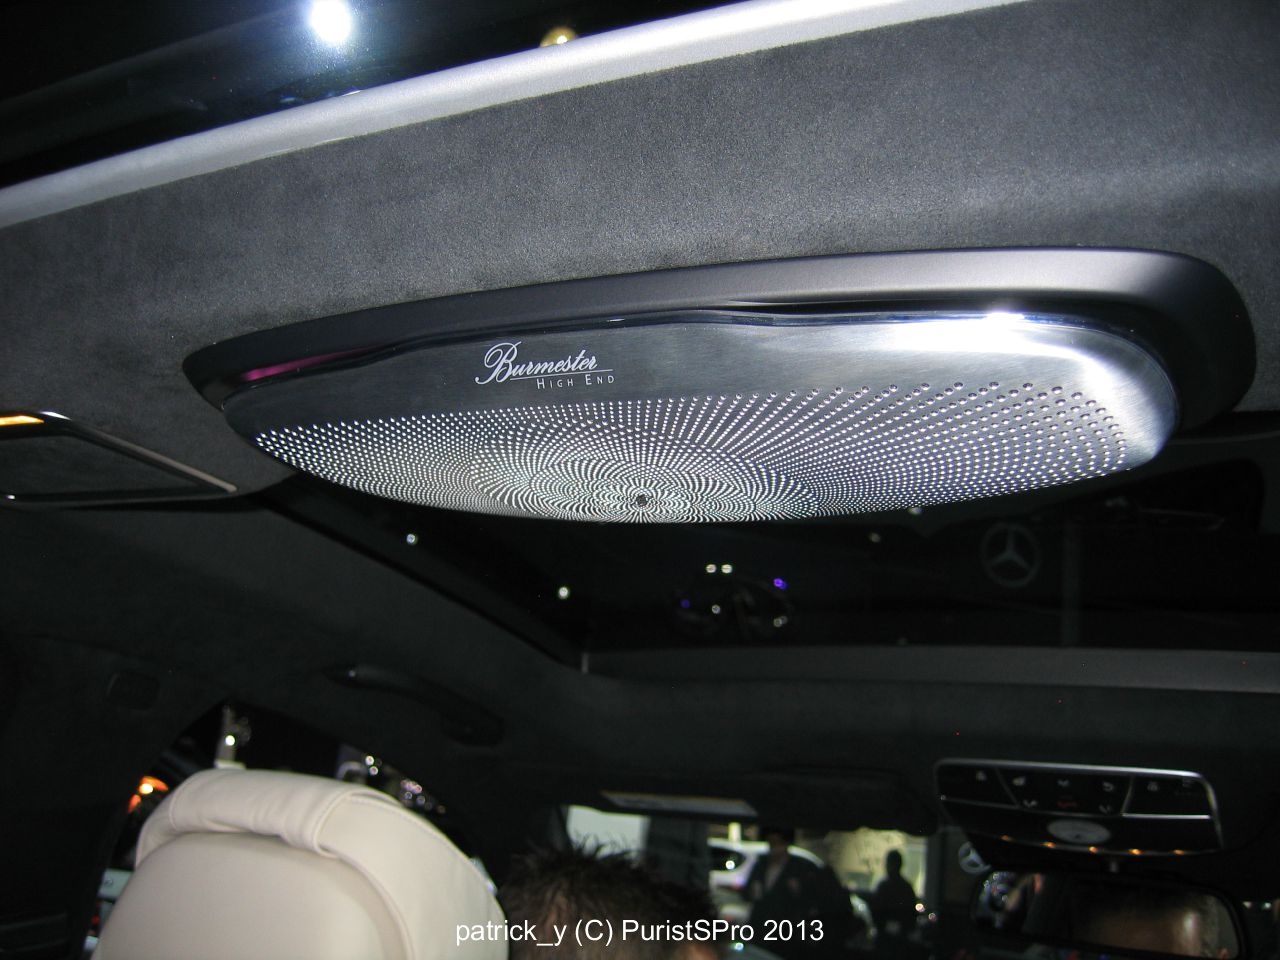 A Burmester Center Fill Speaker on the ceiling of the car. This is the first I've seen a speaker in the ceiling!